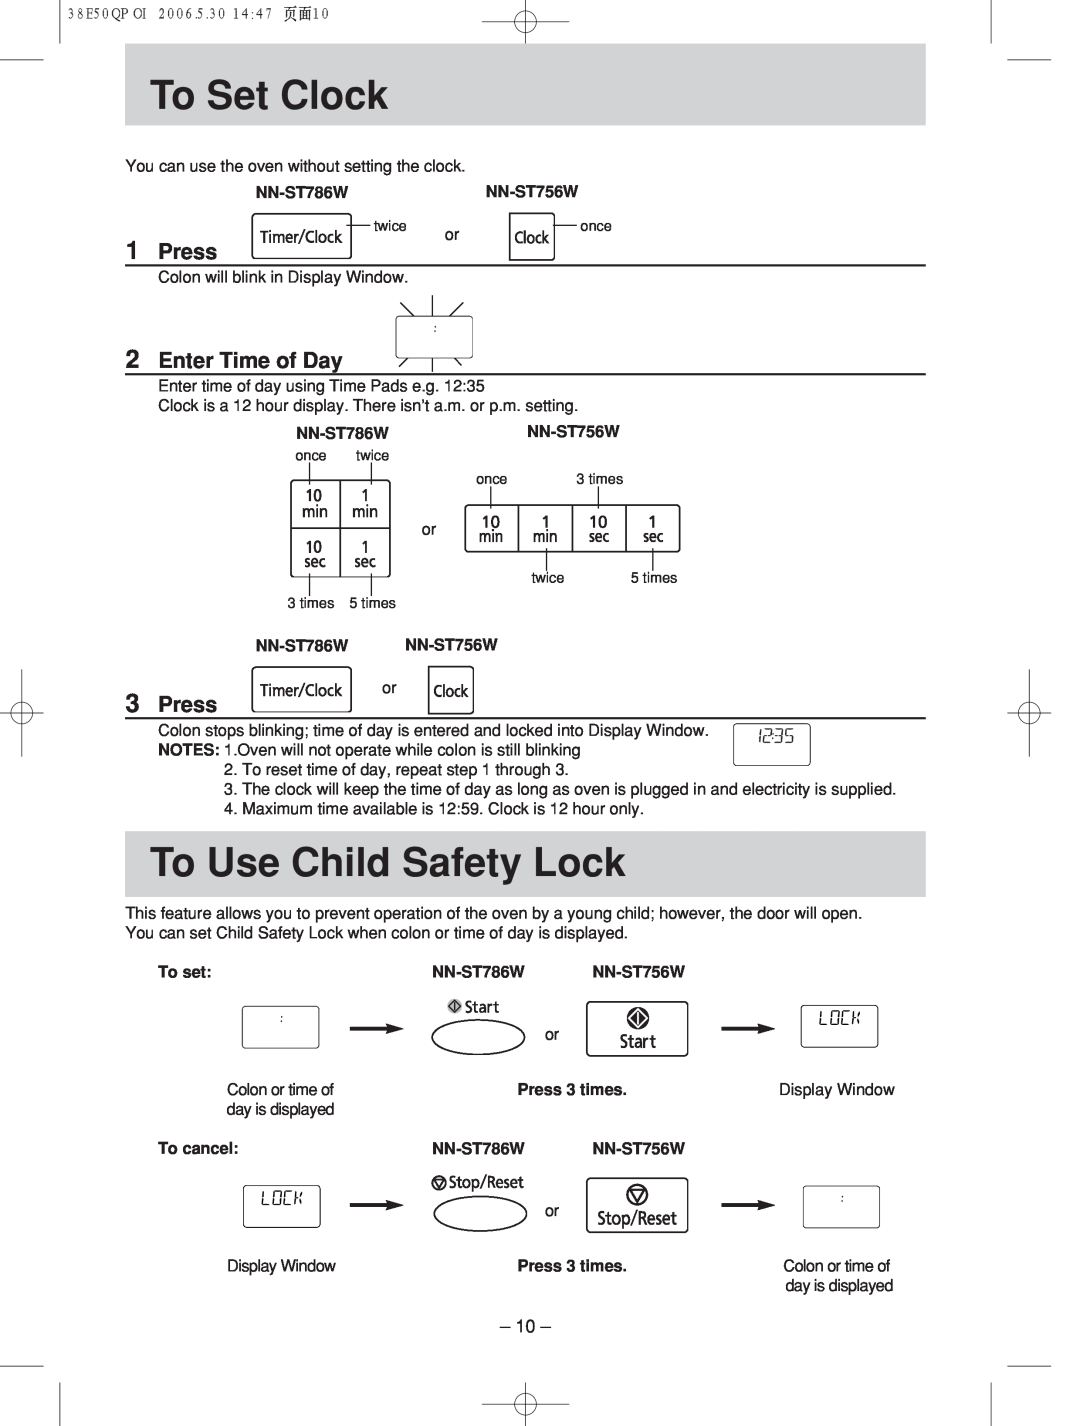 Panasonic NN-ST756W manual To!!!Set Clock, To Use Child Safety Lock, Press, Enter Time of Day 